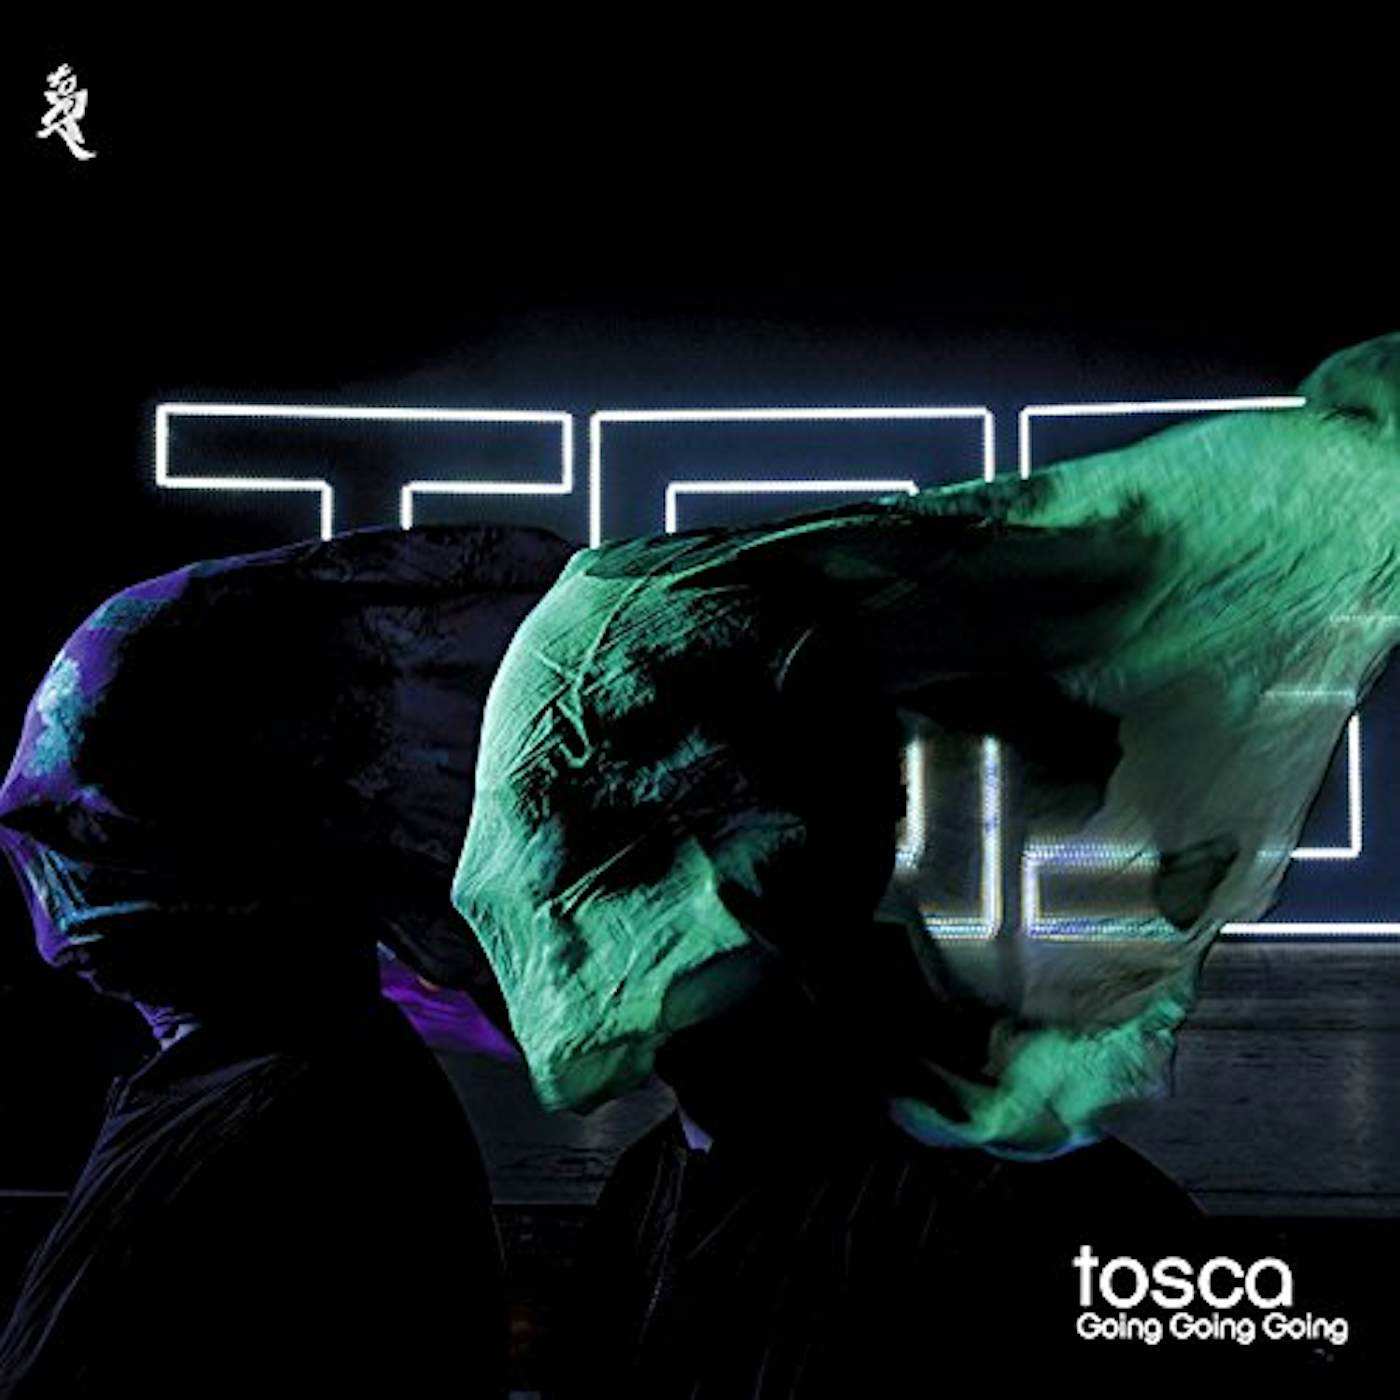 Tosca GOING GOING GOING CD